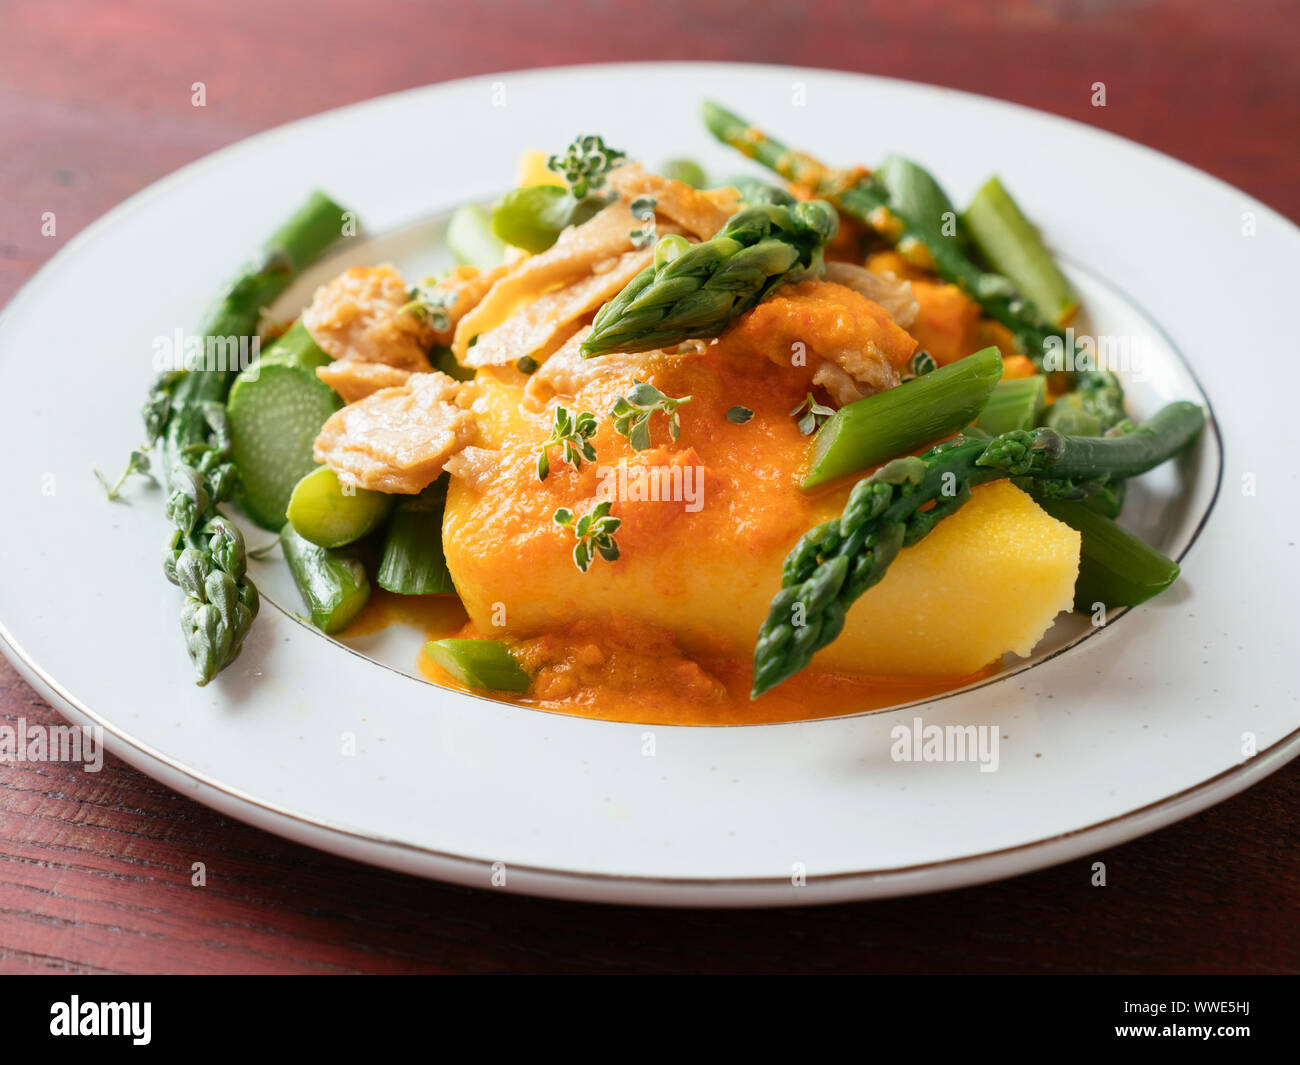 Polenta with Asparagus, Vegan Chickun and a Creamy Bell Pepper Sauce Stock Photo